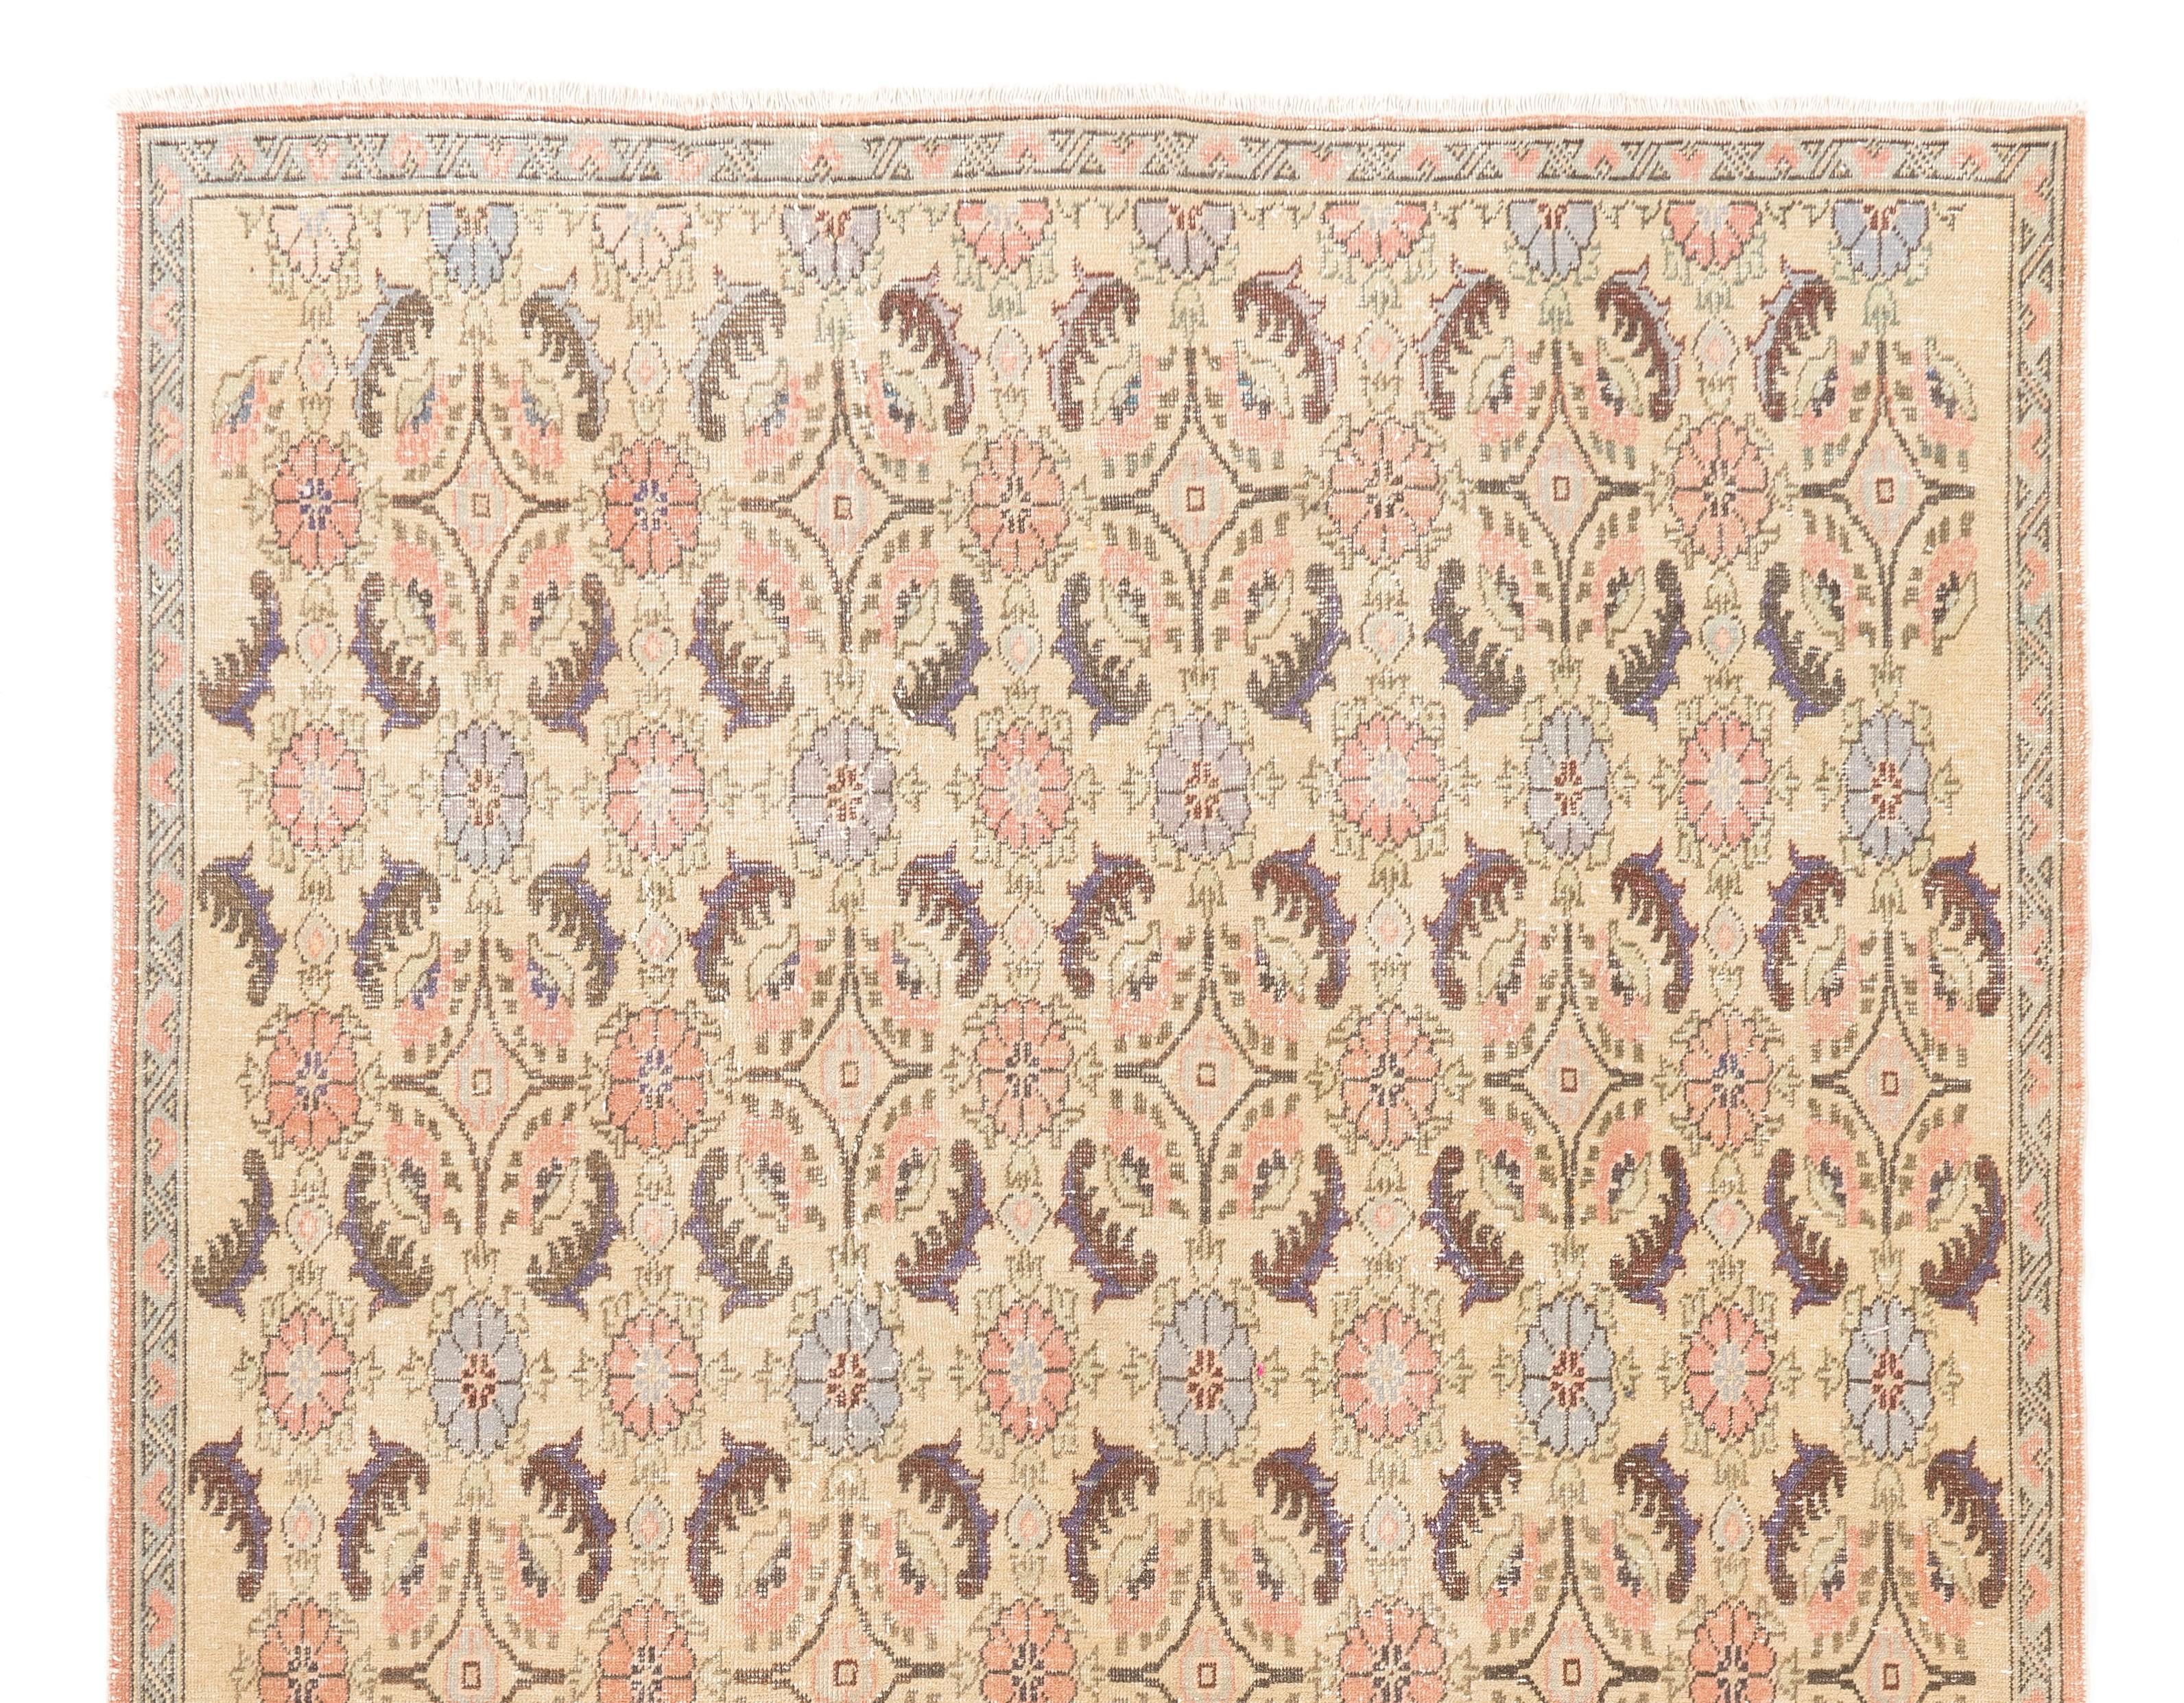 A mid-20th century hand-knotted Turkish rug with an elegant art deco floral design in a soft, pastel color palette of beige, coral pink and light blue. The rug has low wool pile on cotton foundation, is in well-preserved condition, sturdy,